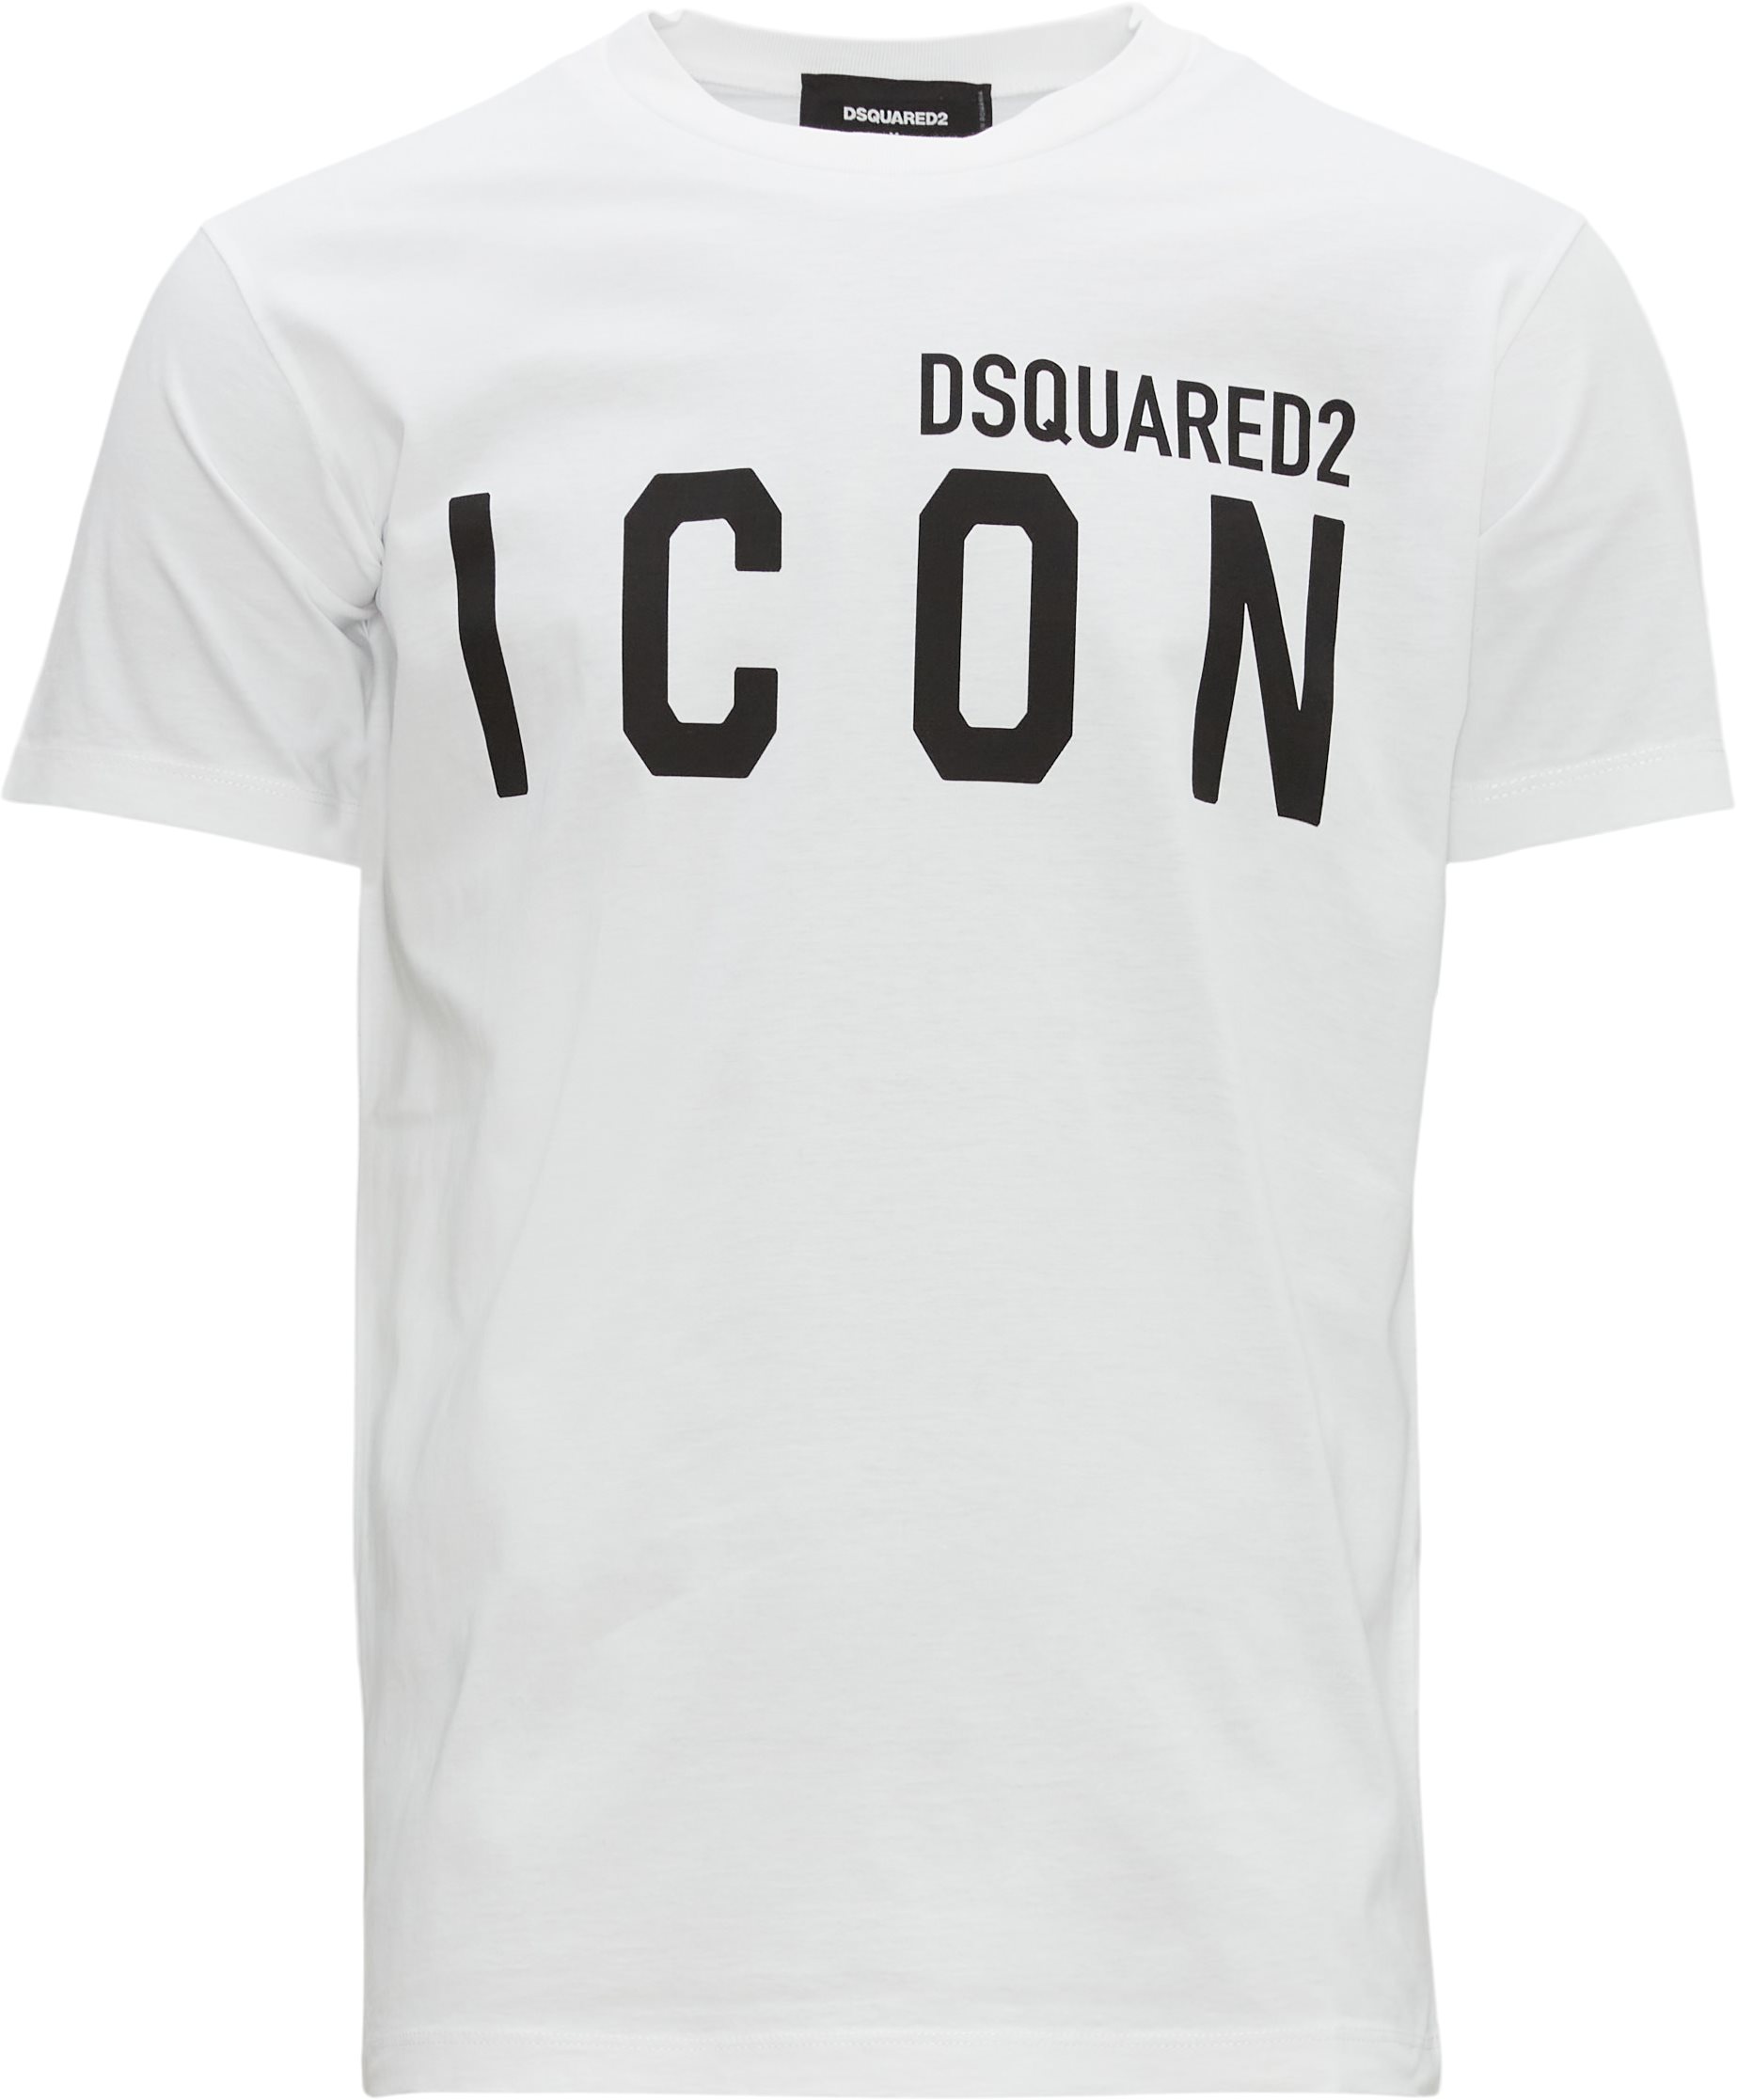 Dsquared2 T-shirts S79GC0003 S23009 ICON White